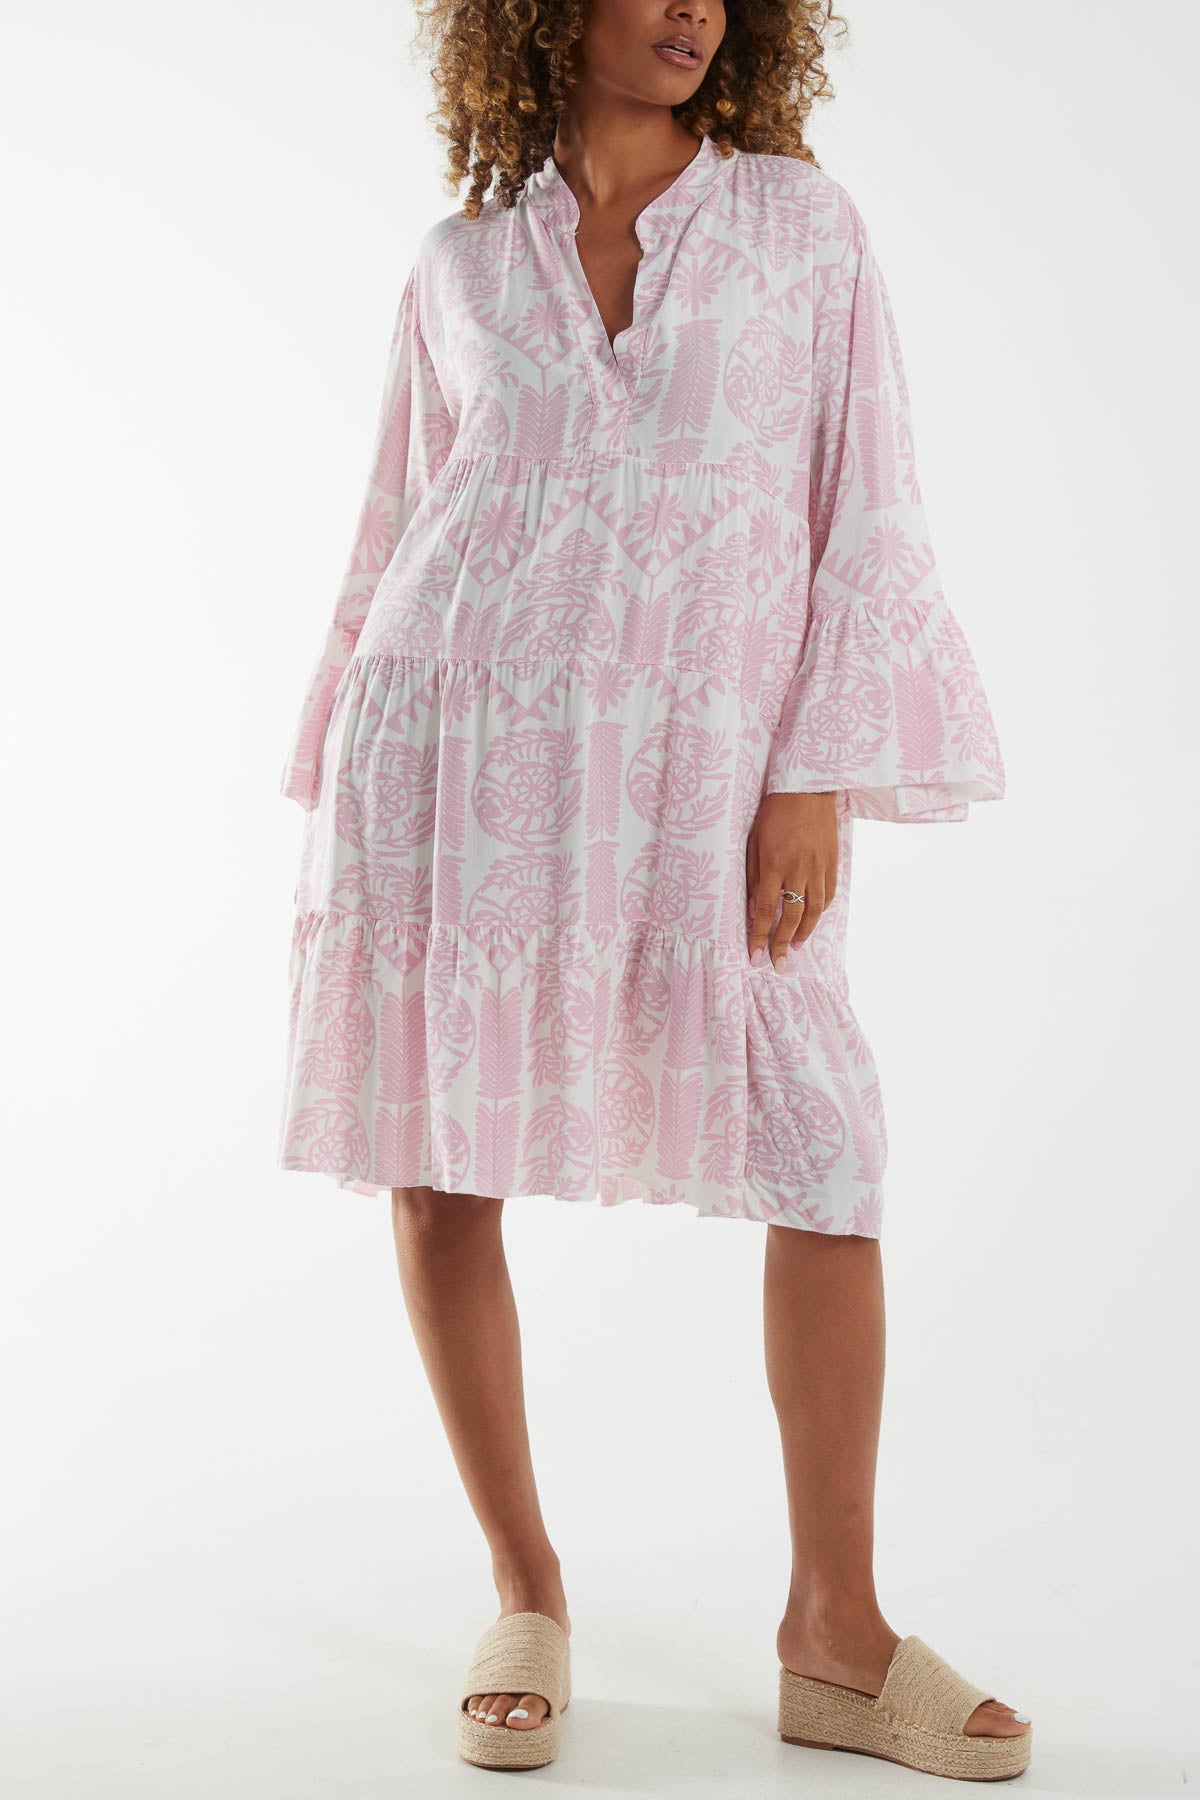 Tiered Baroque Floral Smock Print Dress